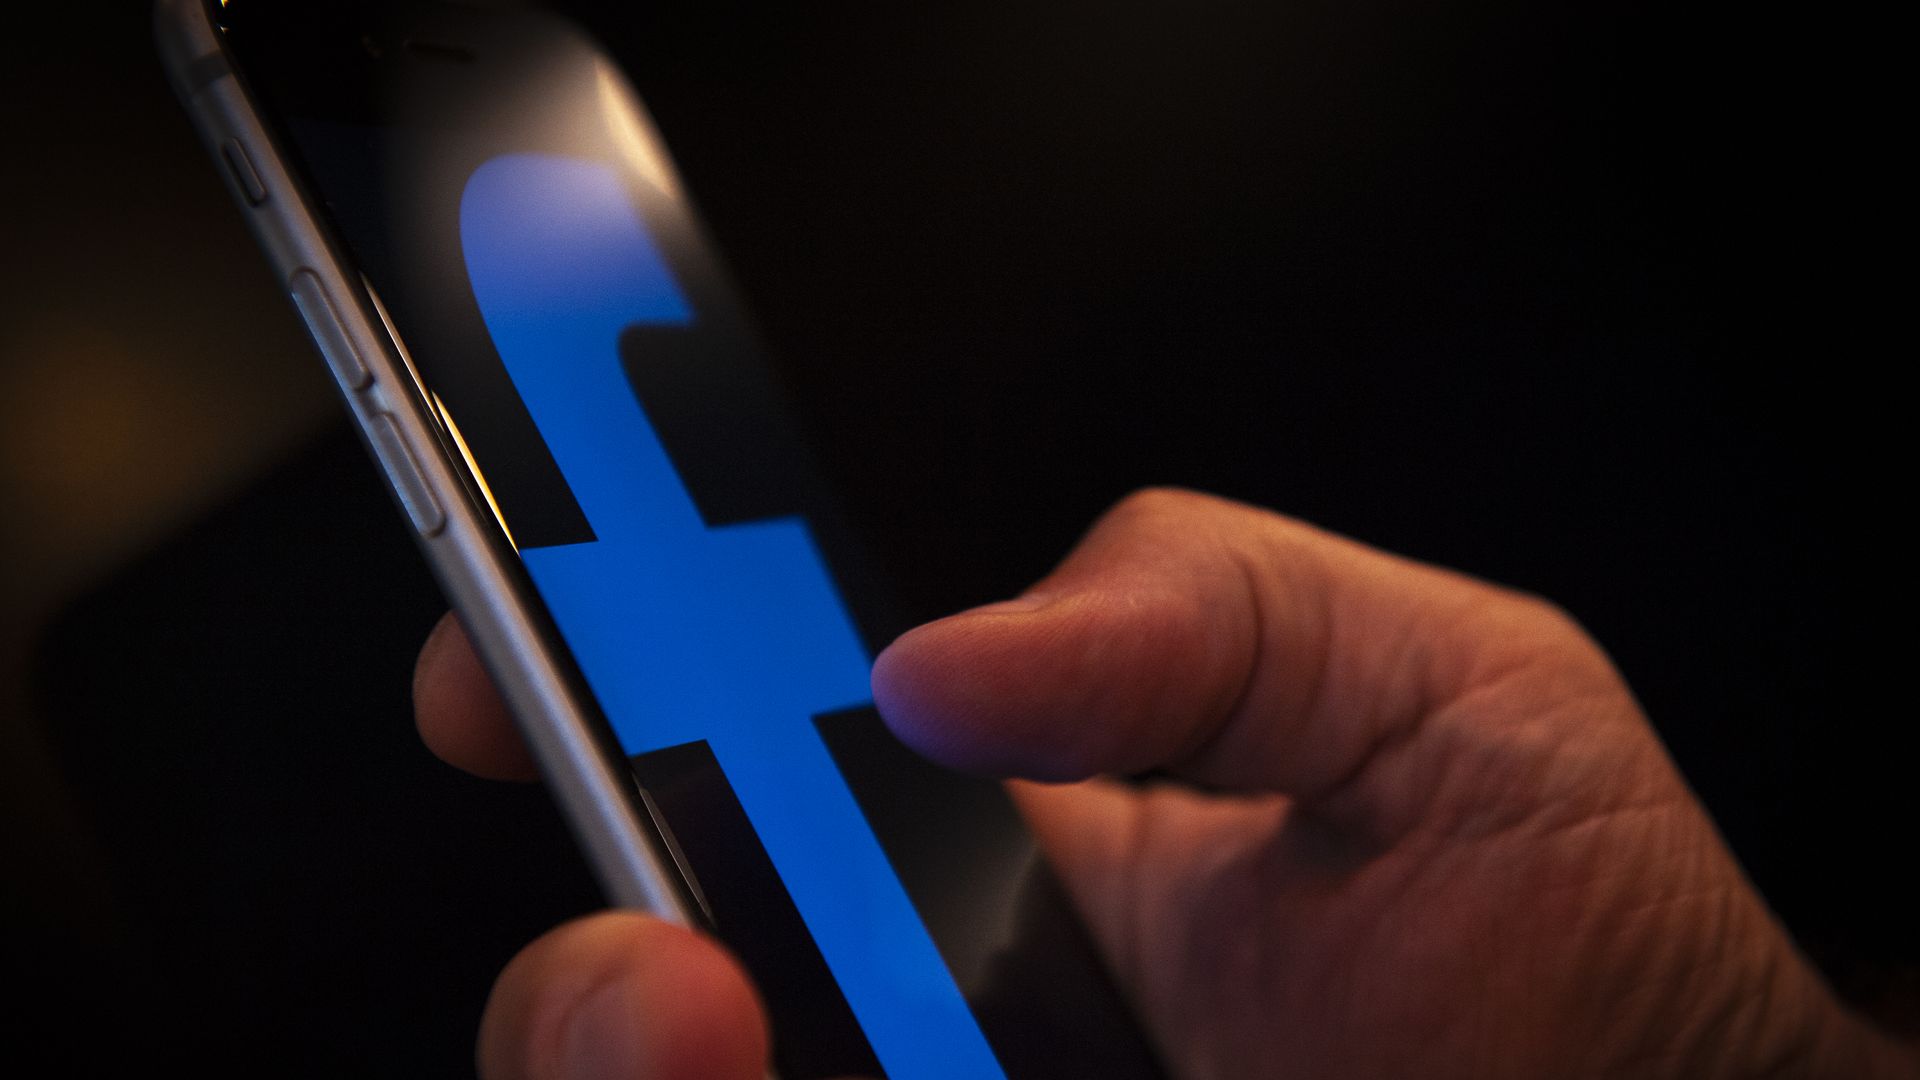 A Facebook logo is seen on an iPhone is seen in this photo illustration on July 9, 2018. (Photo by Jaap Arriens/NurPhoto via Getty Images)